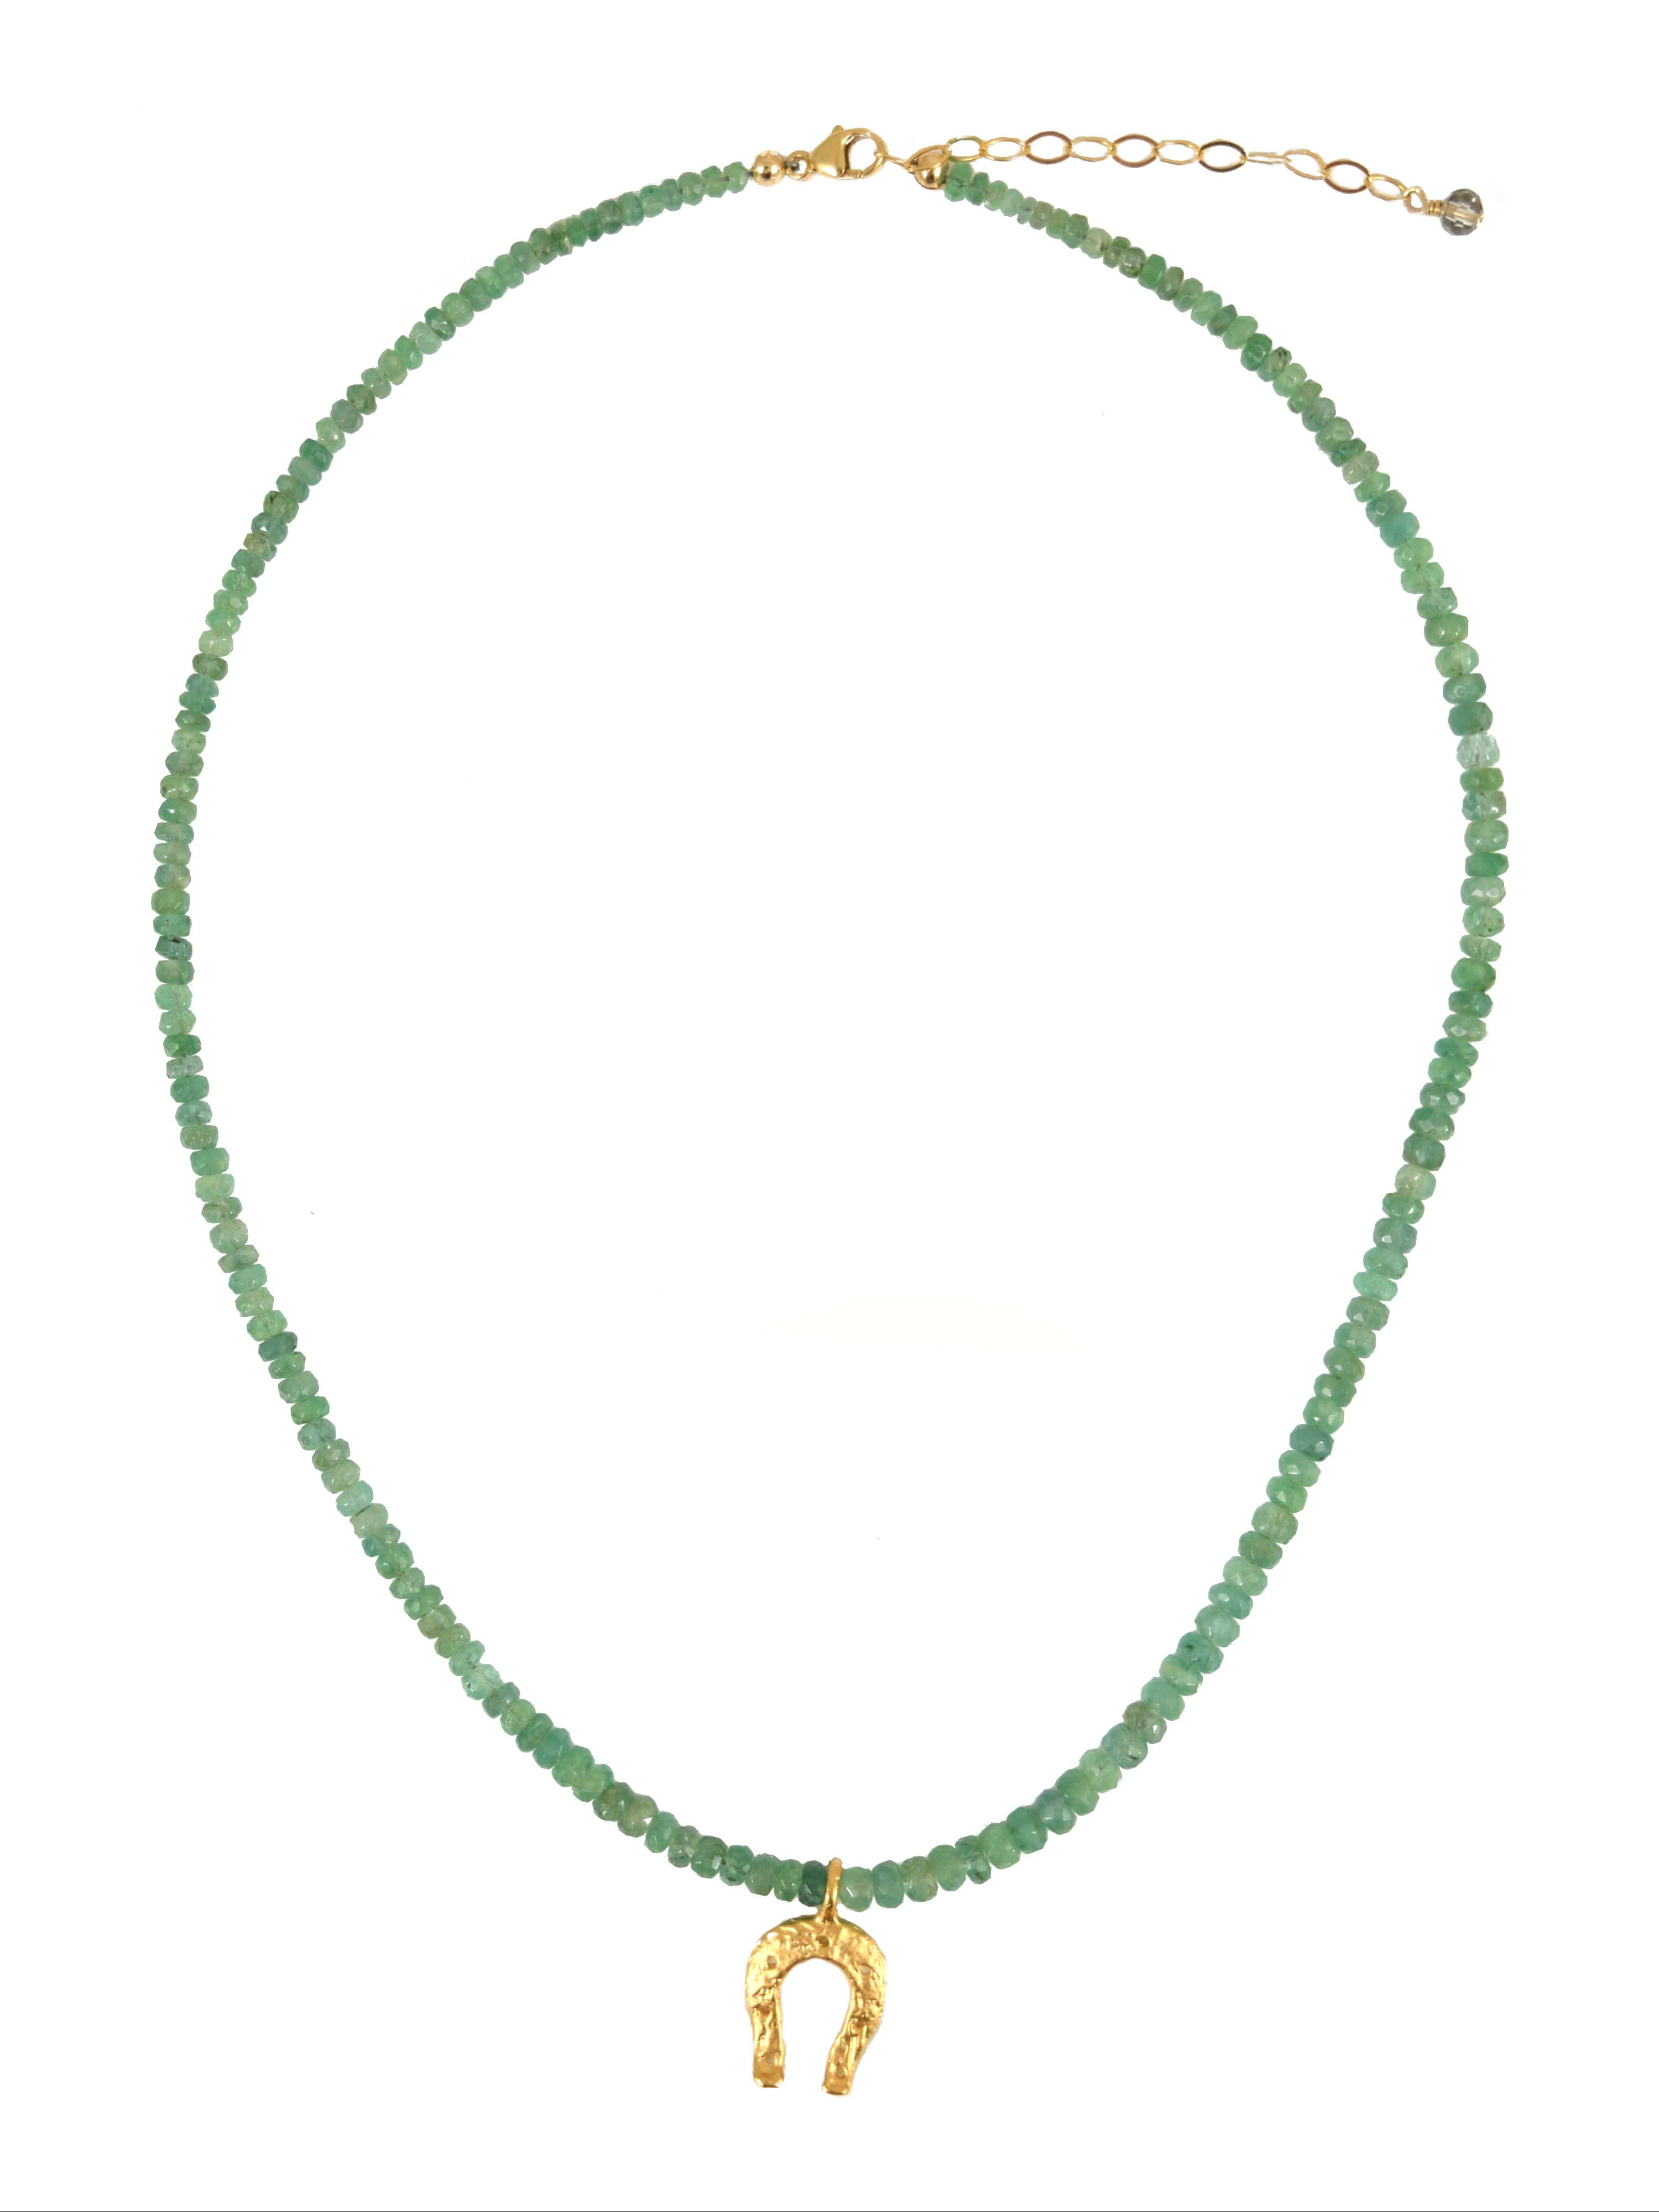 Lucky Lady Emerald Necklace